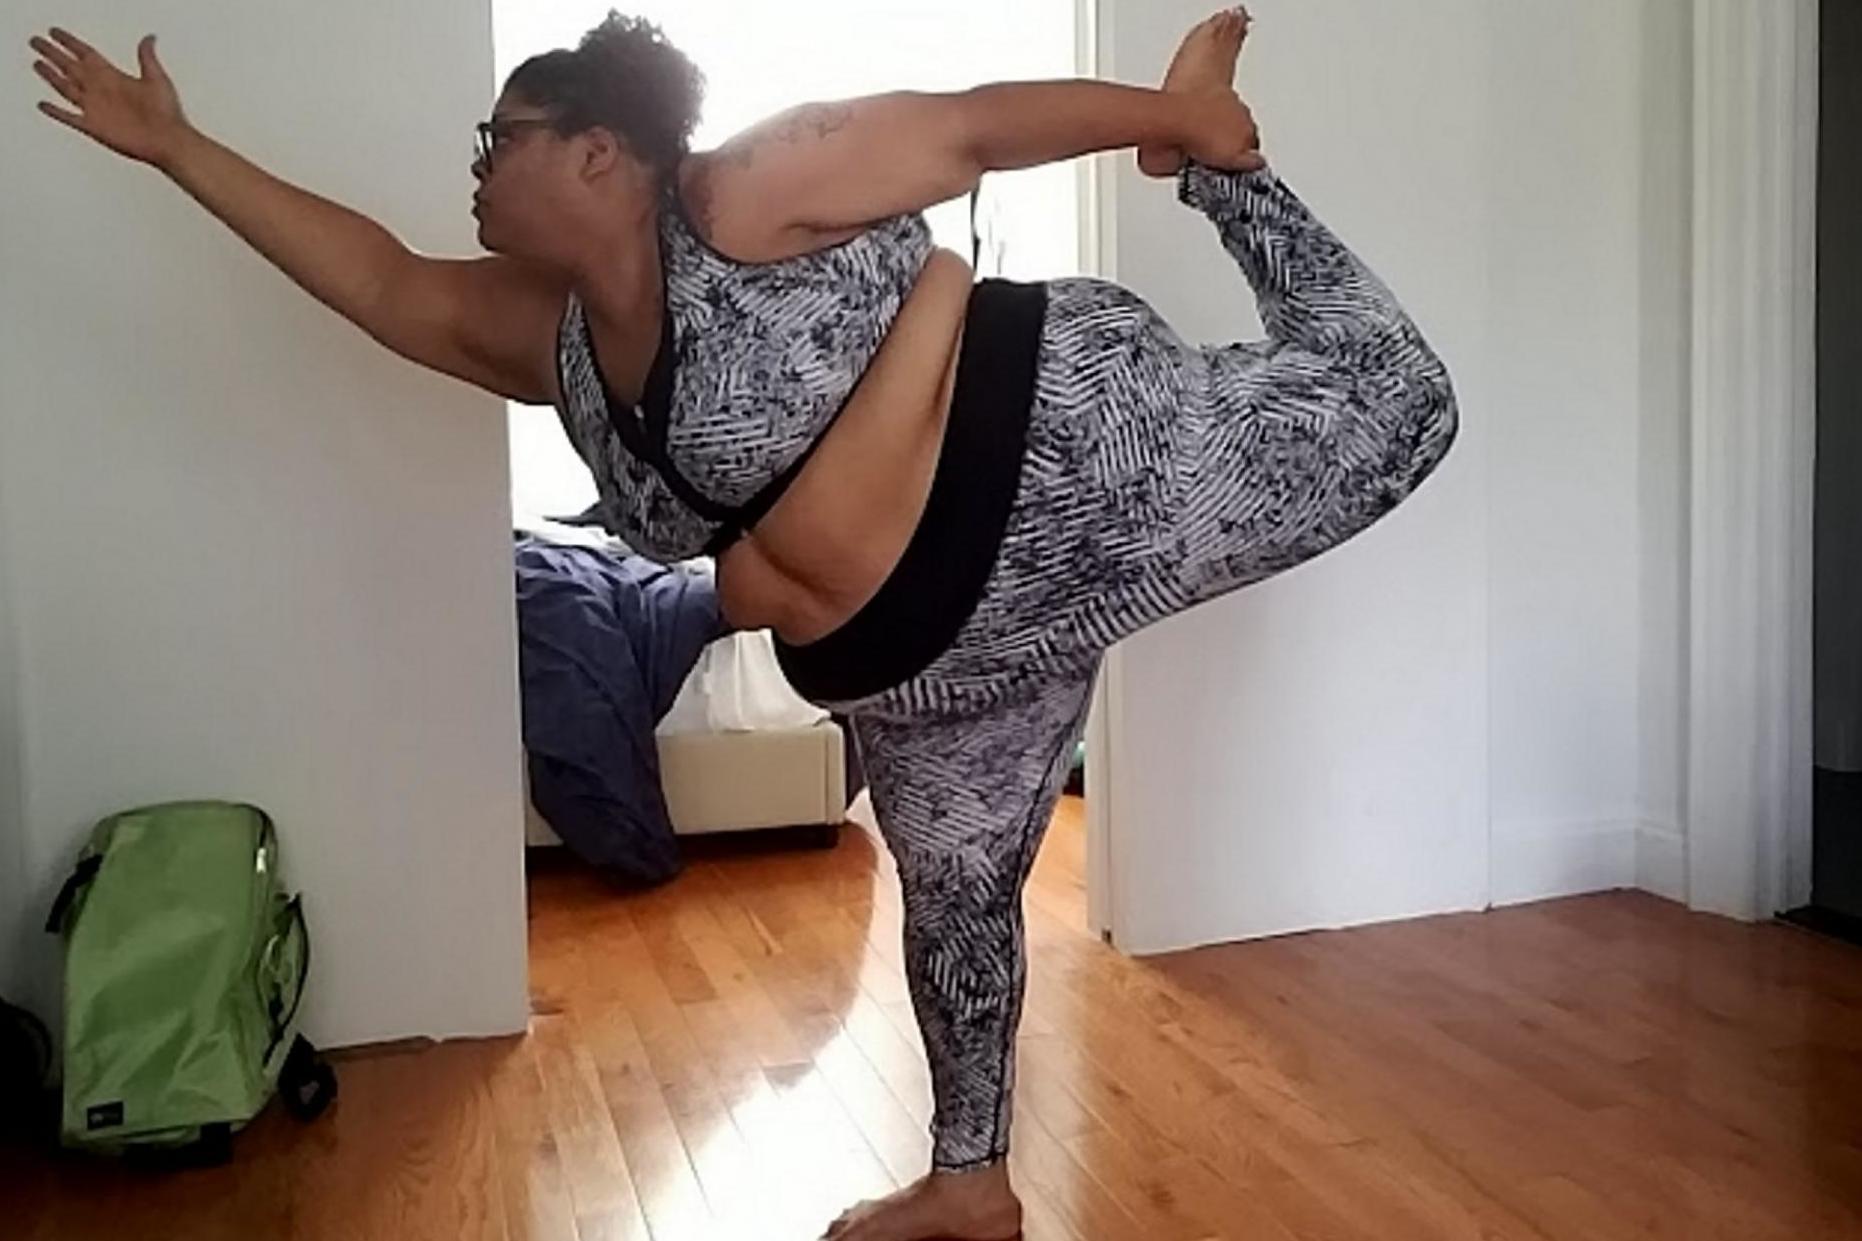 Plus-size woman becomes yoga teacher after noticing lack of diversity among  instructors, The Independent